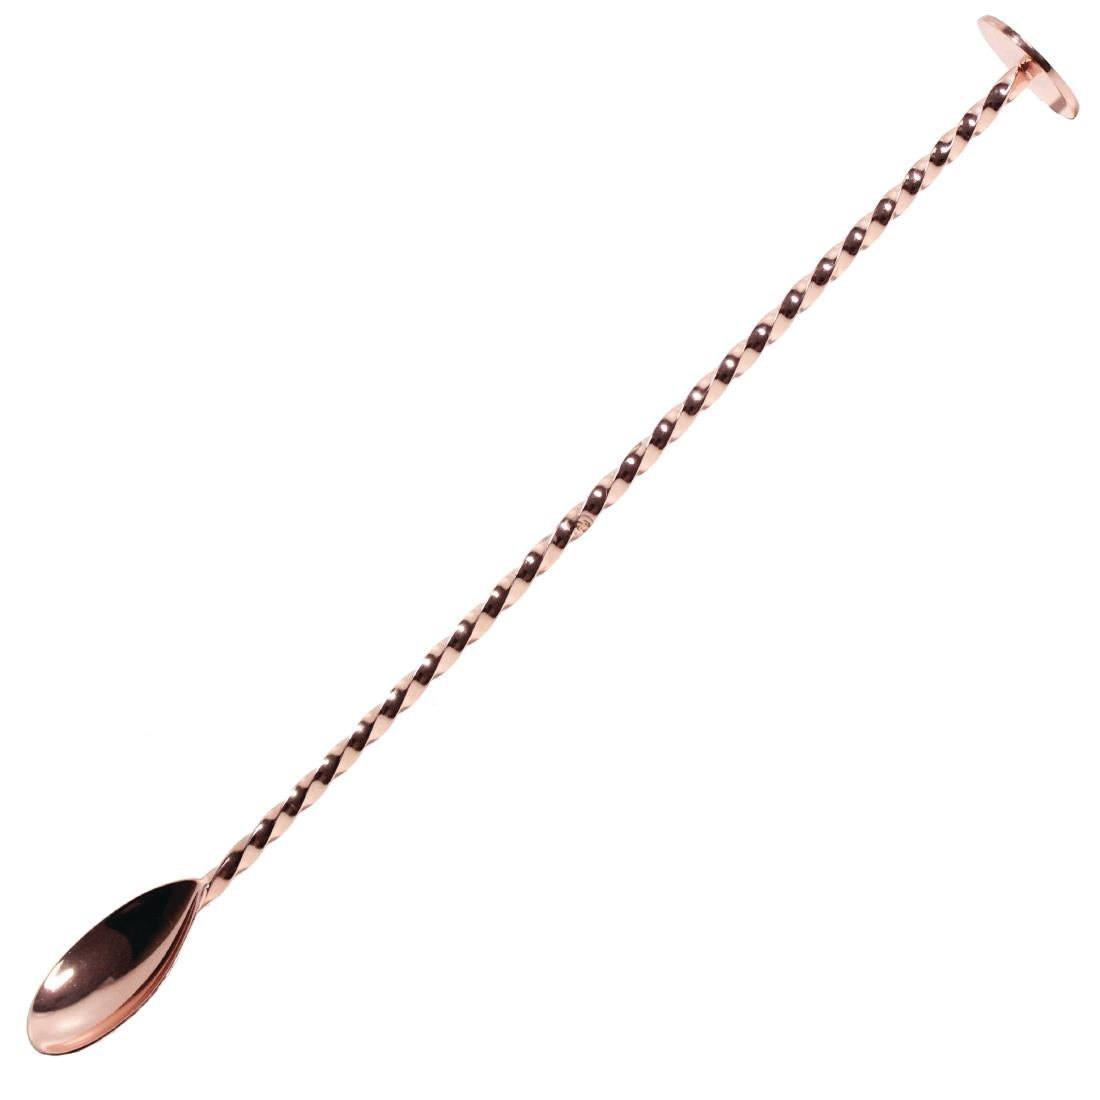 Artis Bar Spoon Twisted Copper